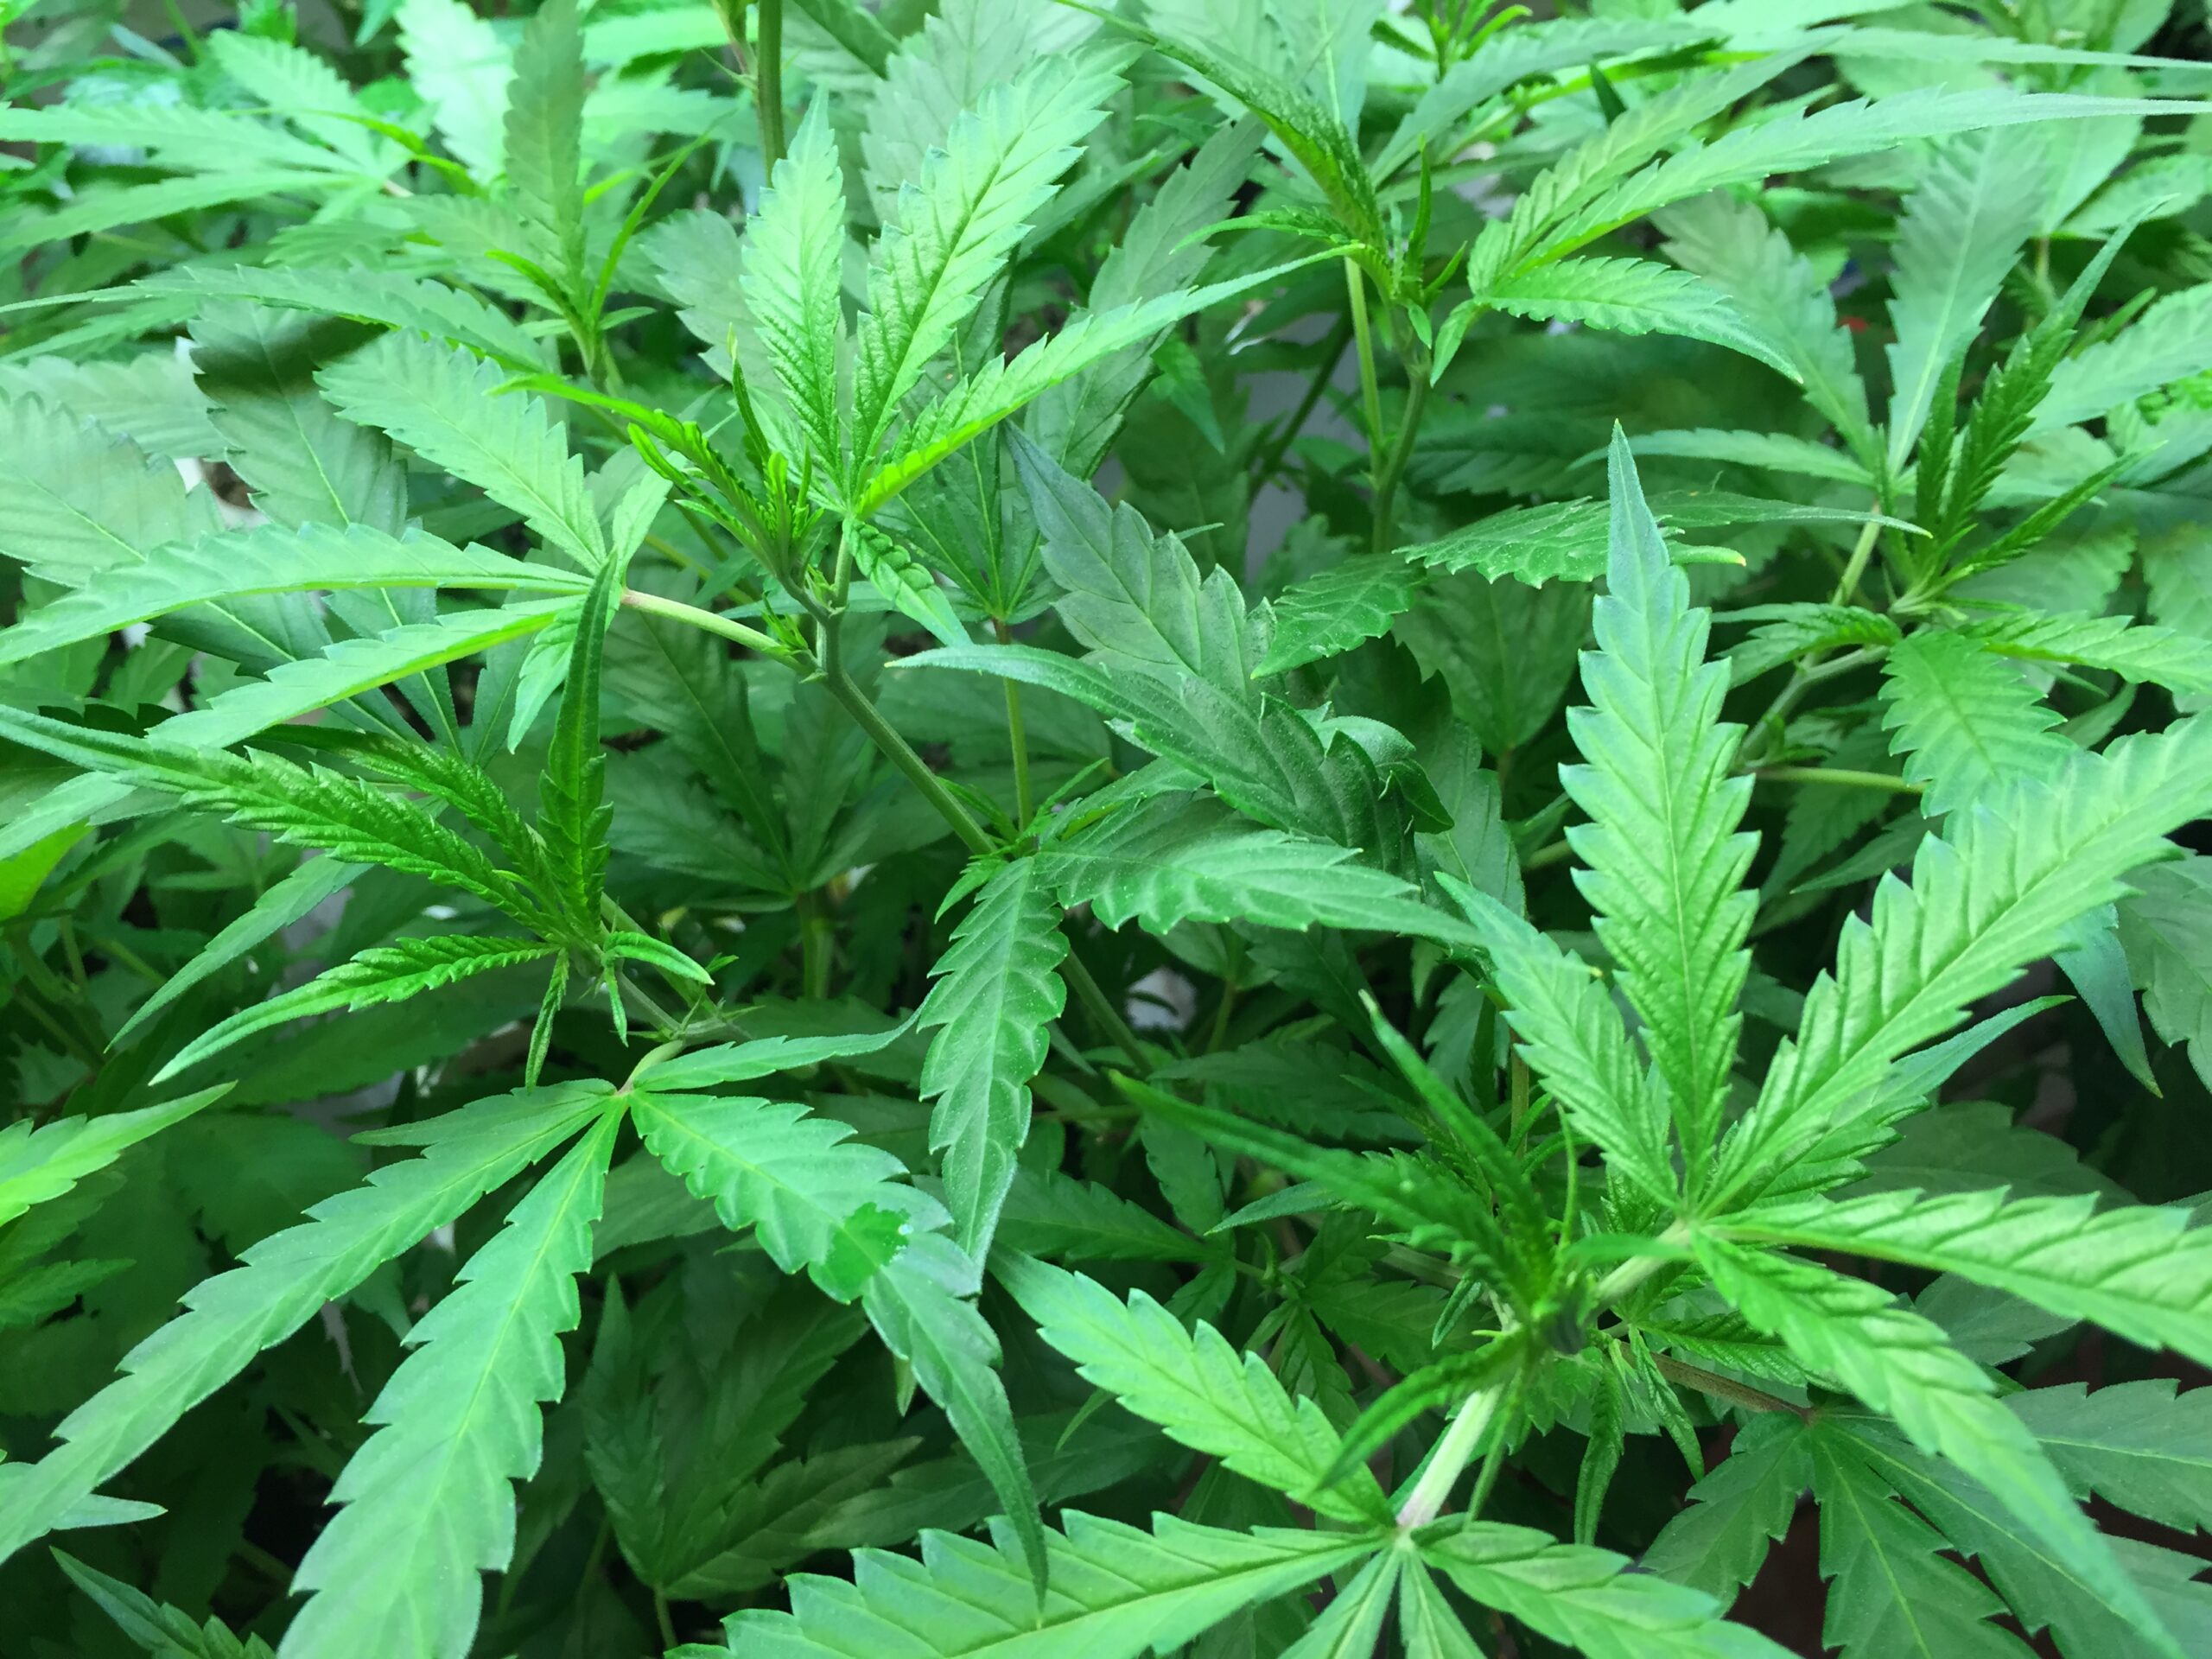 A close-up view of lush green cannabis plants with multiple jagged leaves in natural light, representing New Jersey's vote on marijuana legalization.